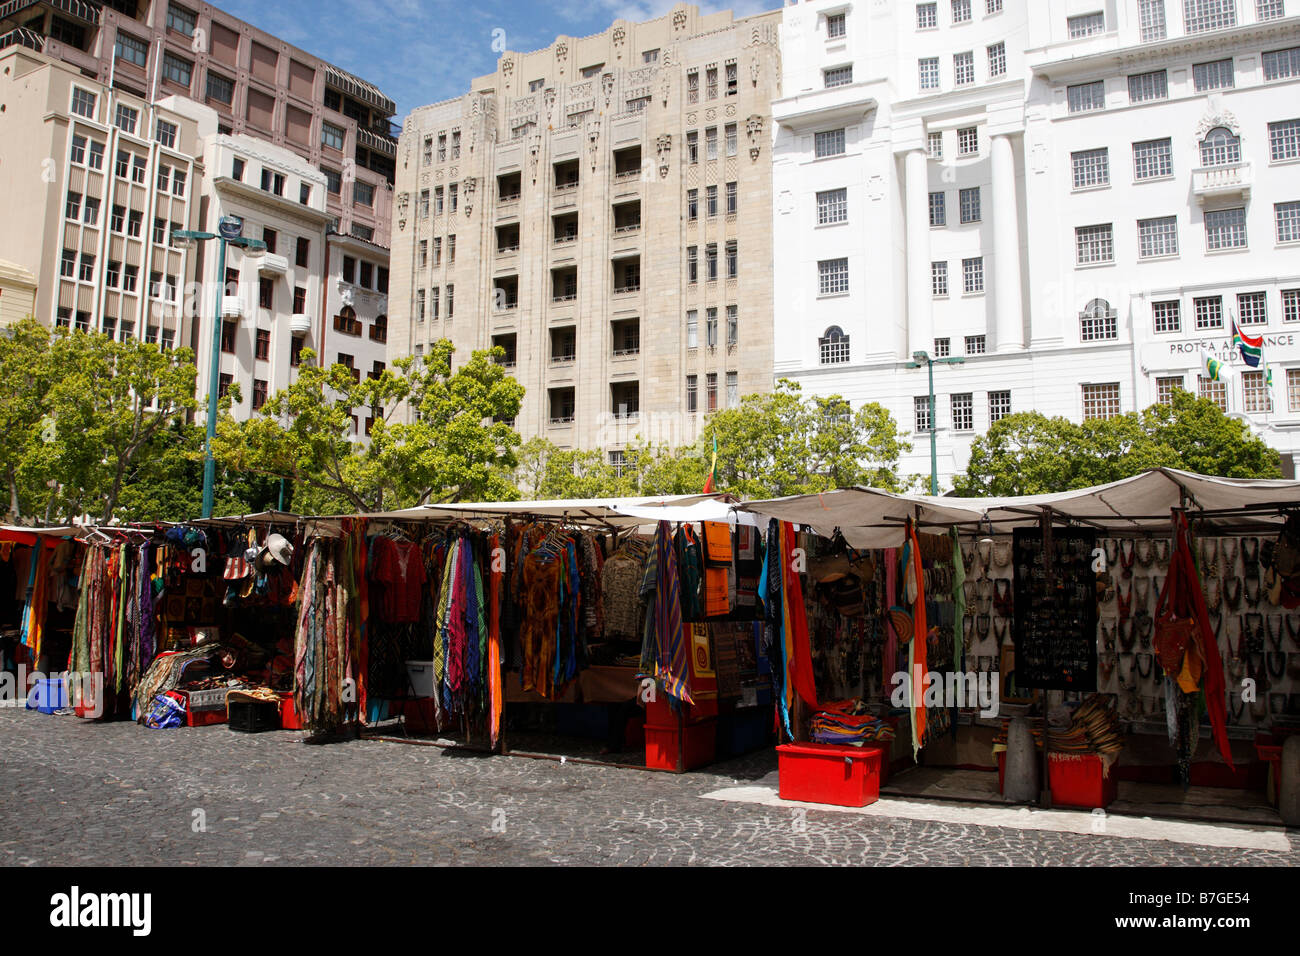 market stalls selling local crafts greenmarket square cape town south africa Stock Photo